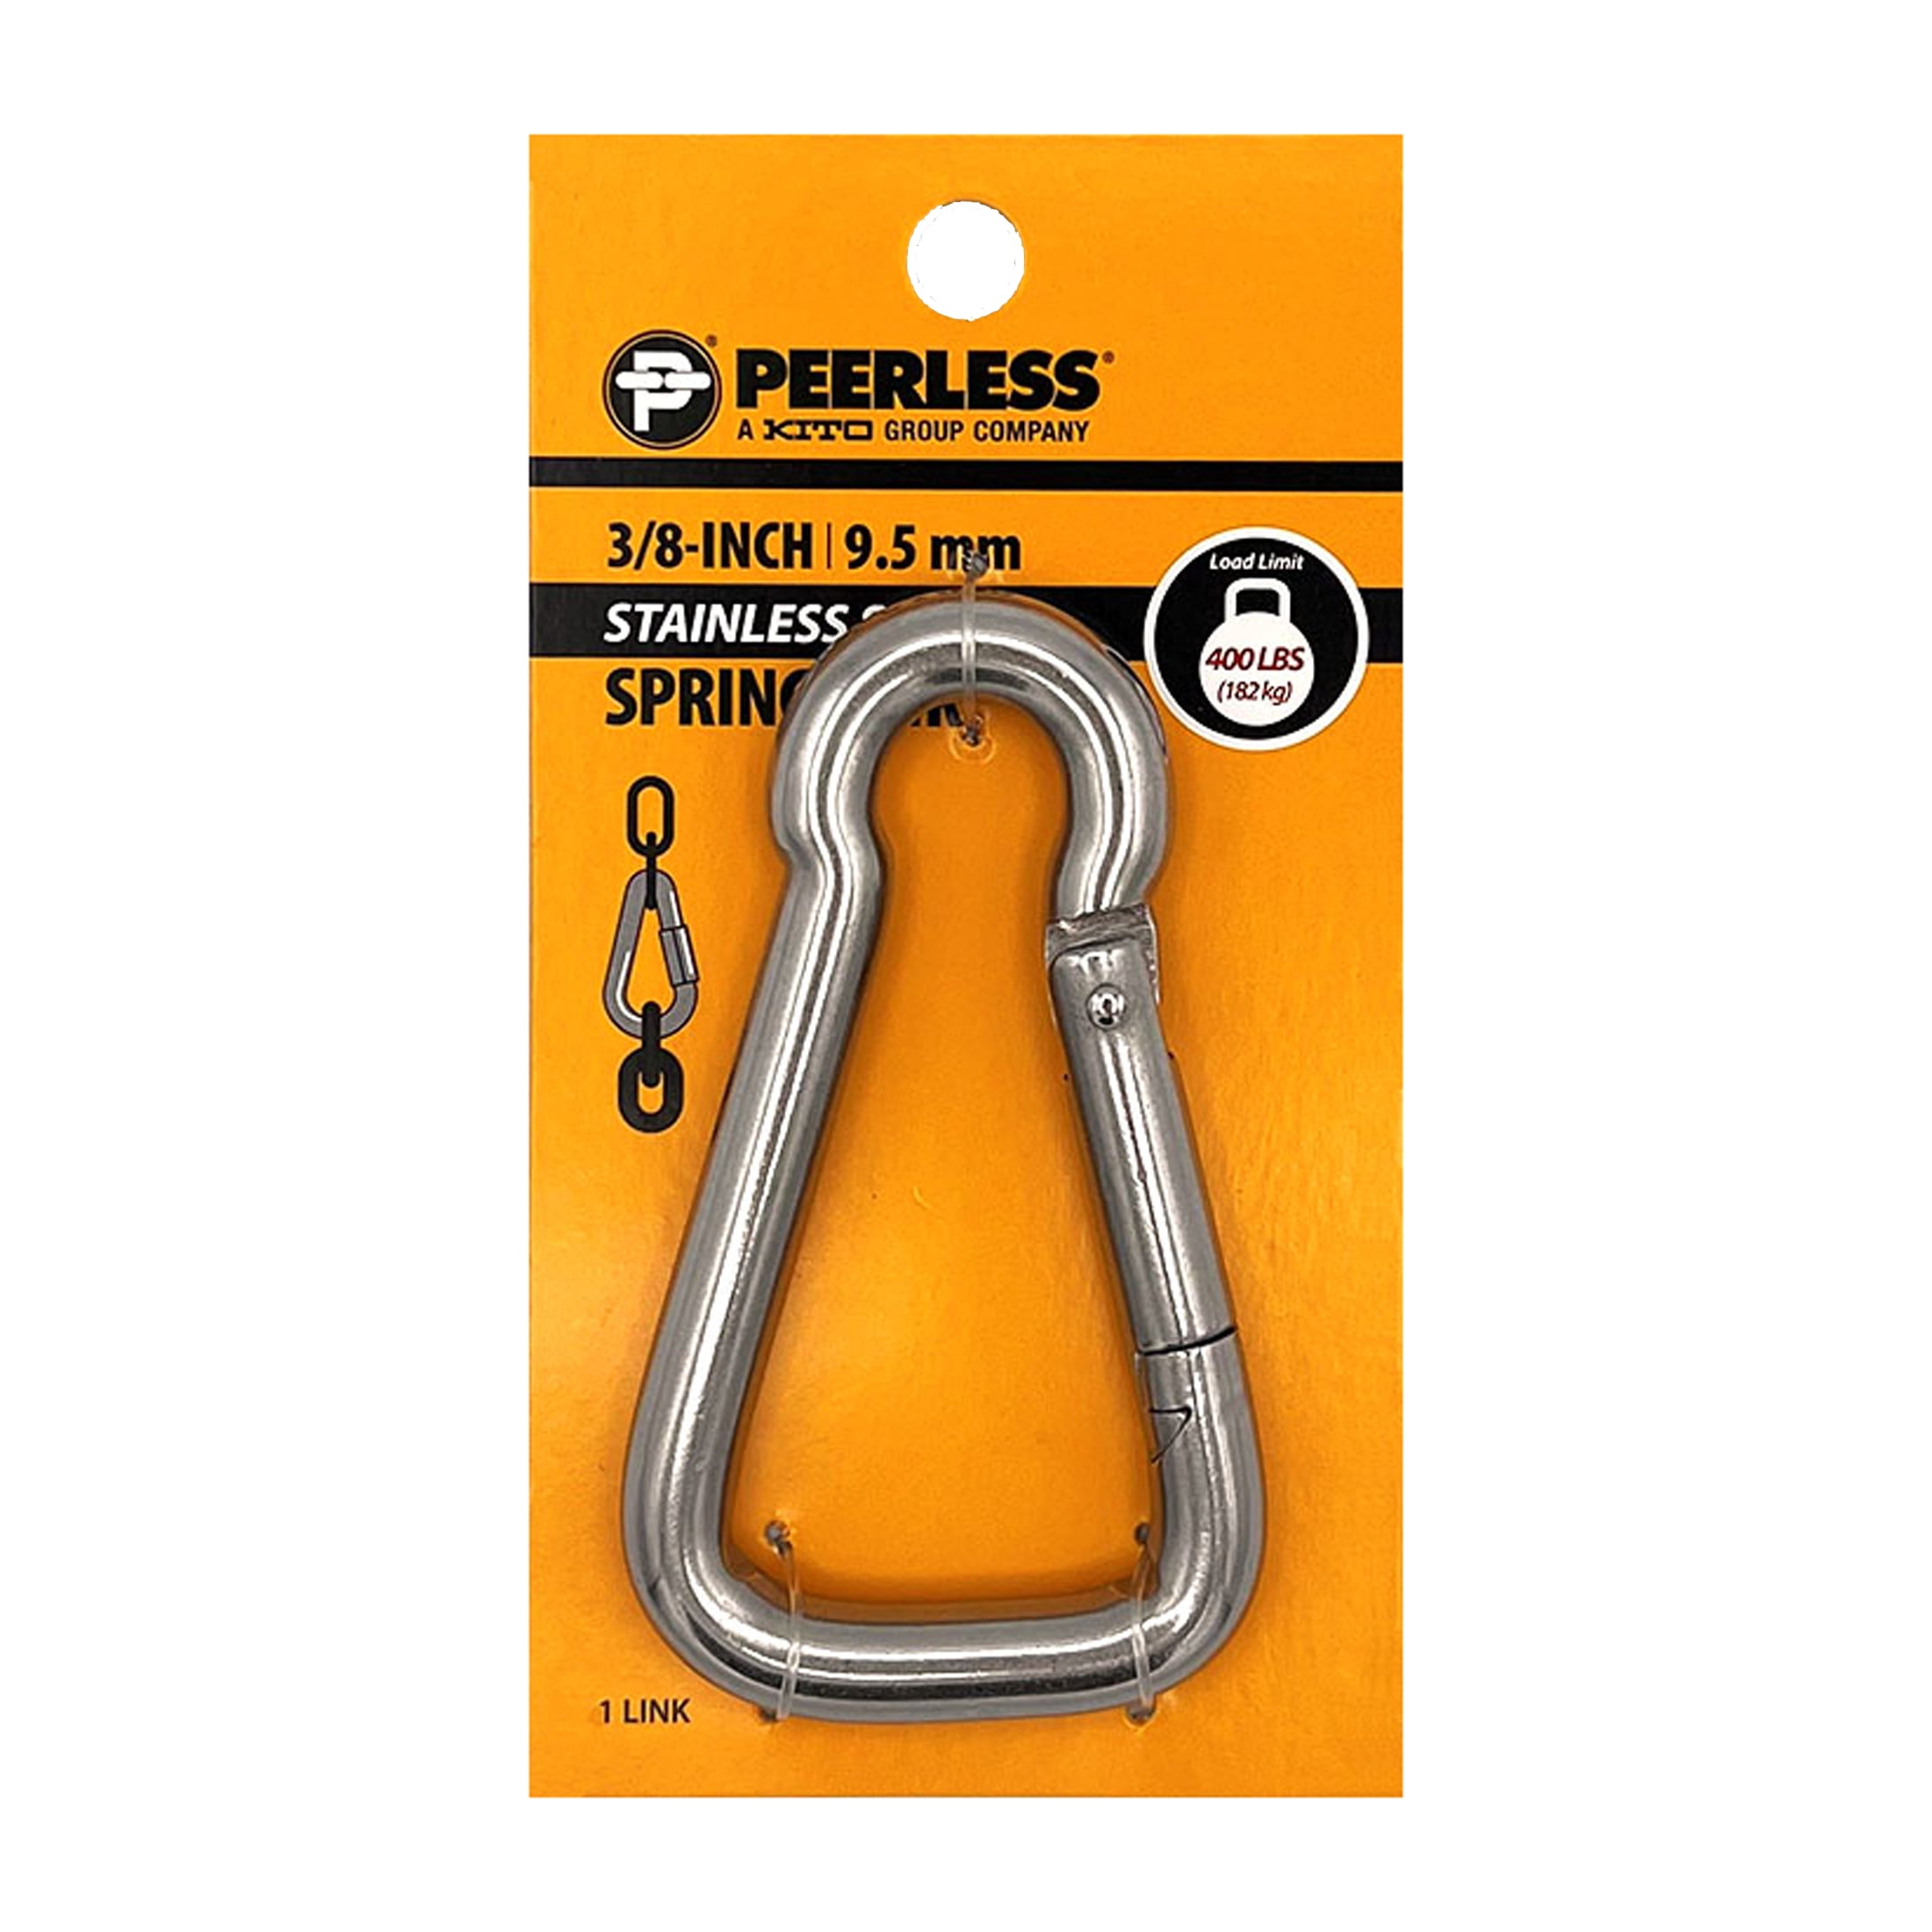 3/8 Stainless Steel Spring Link, Peerless Chain Company, #4731639HS 